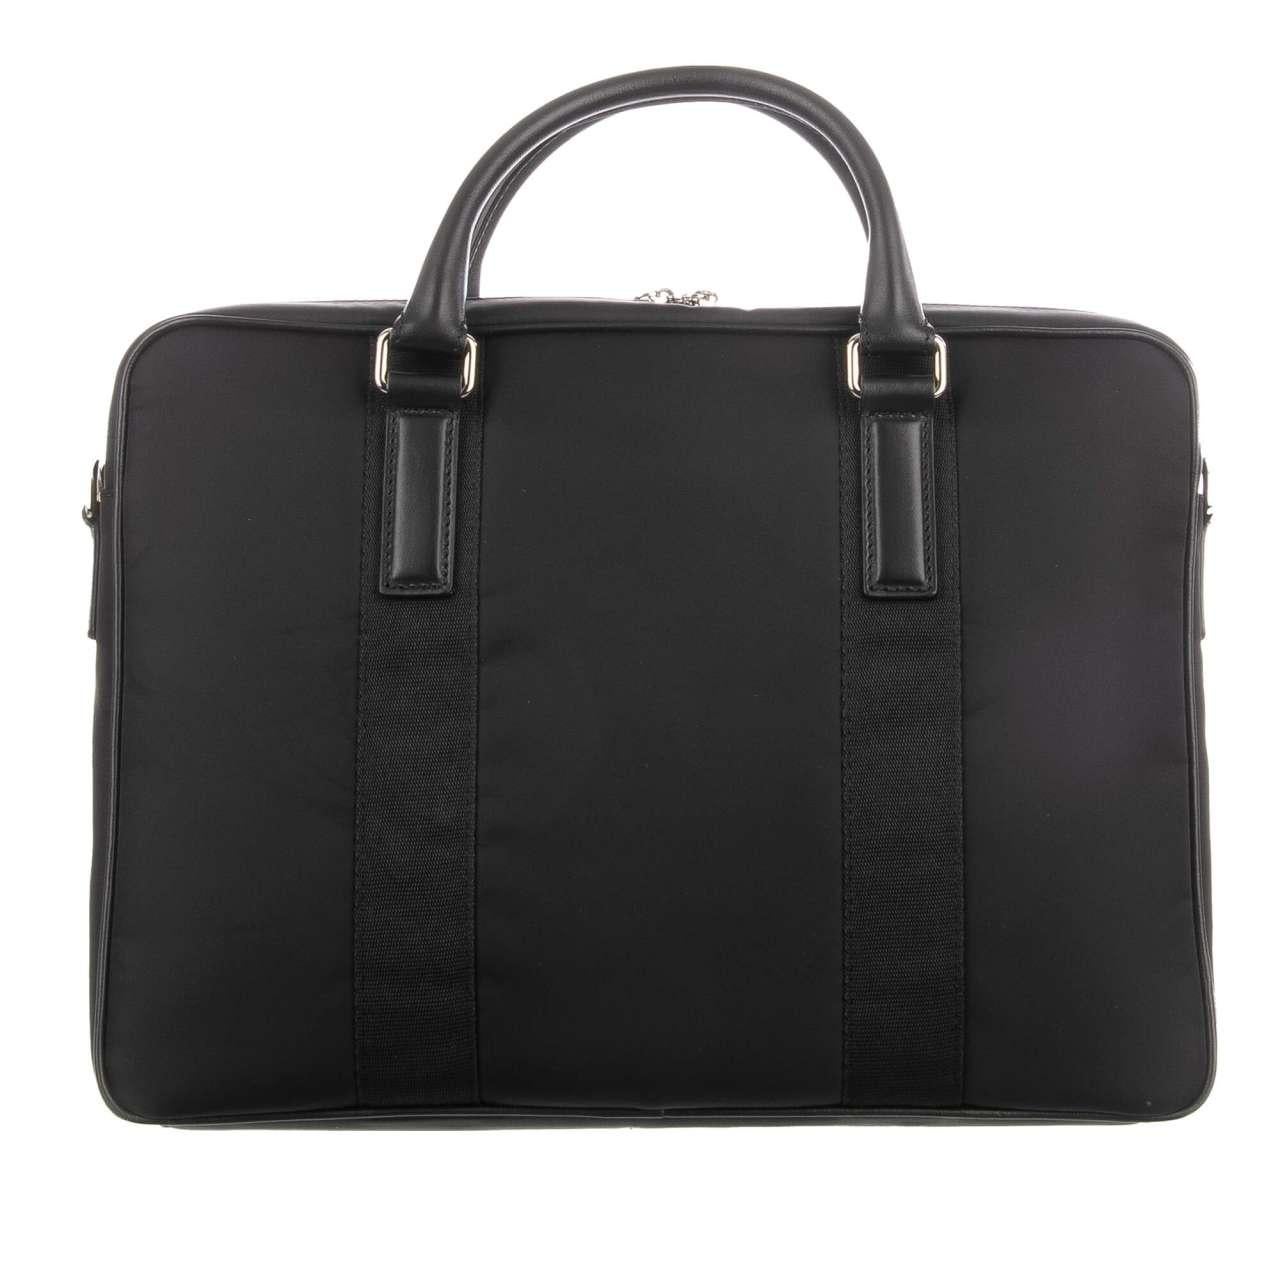 - Nylon Briefcase / Laptop Bag with logo printed srap, leather details, logo plate and pockets by DOLCE & GABBANA - New with Tag, Dustbag and Authenticity Card - MADE IN ITALY - Former RRP: EUR 995 - Detachable / Adjustable shoulder strap with logo